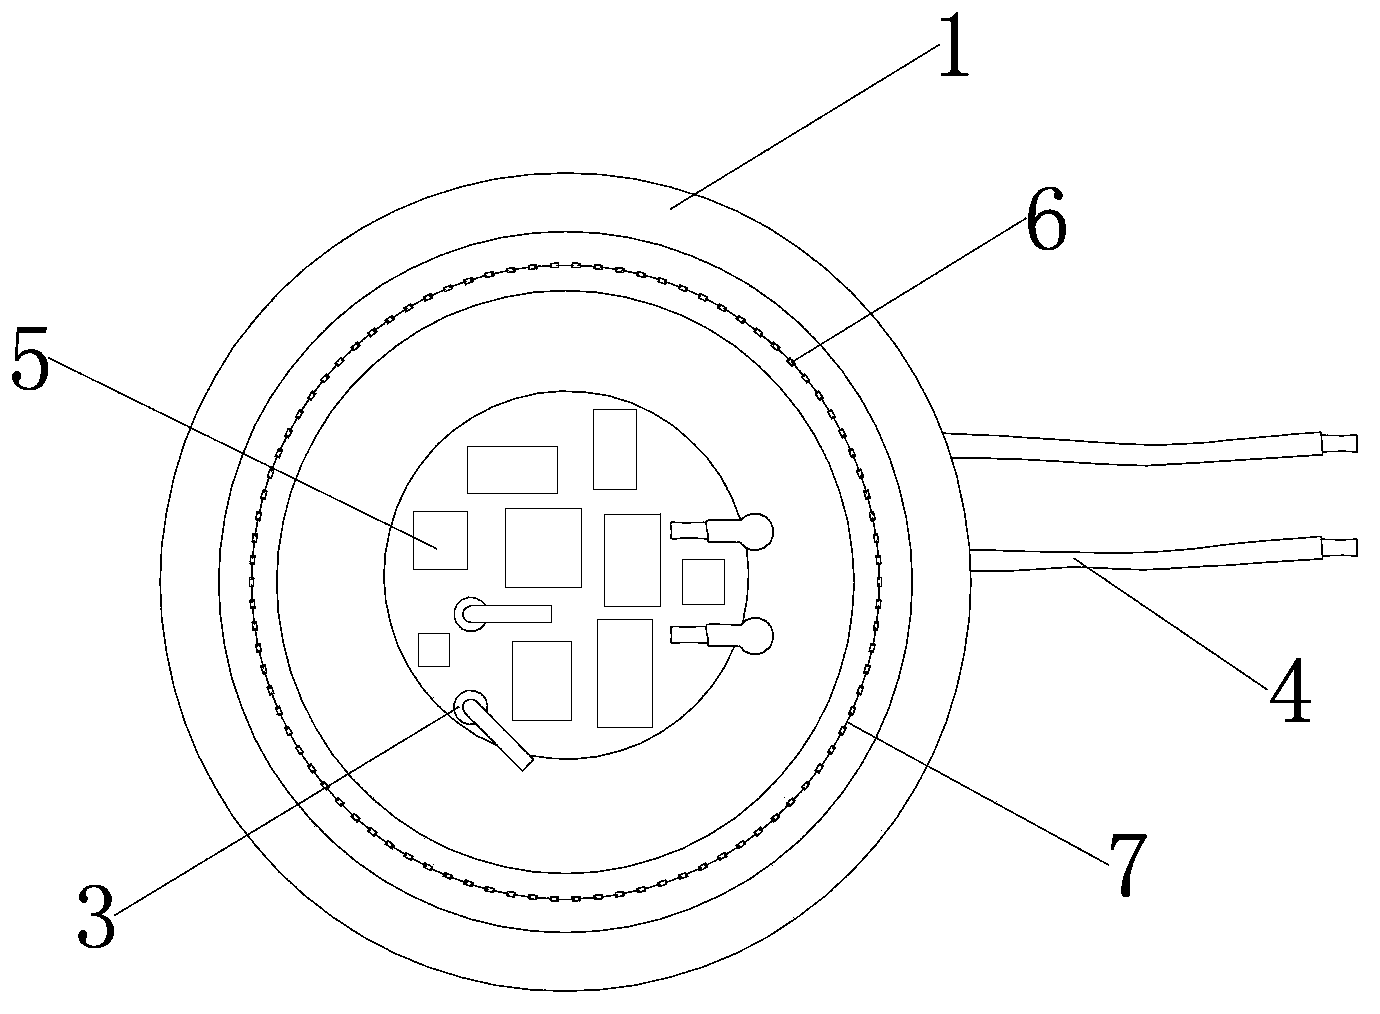 Power supply installation structure of light-emitting diode (LED) lamp